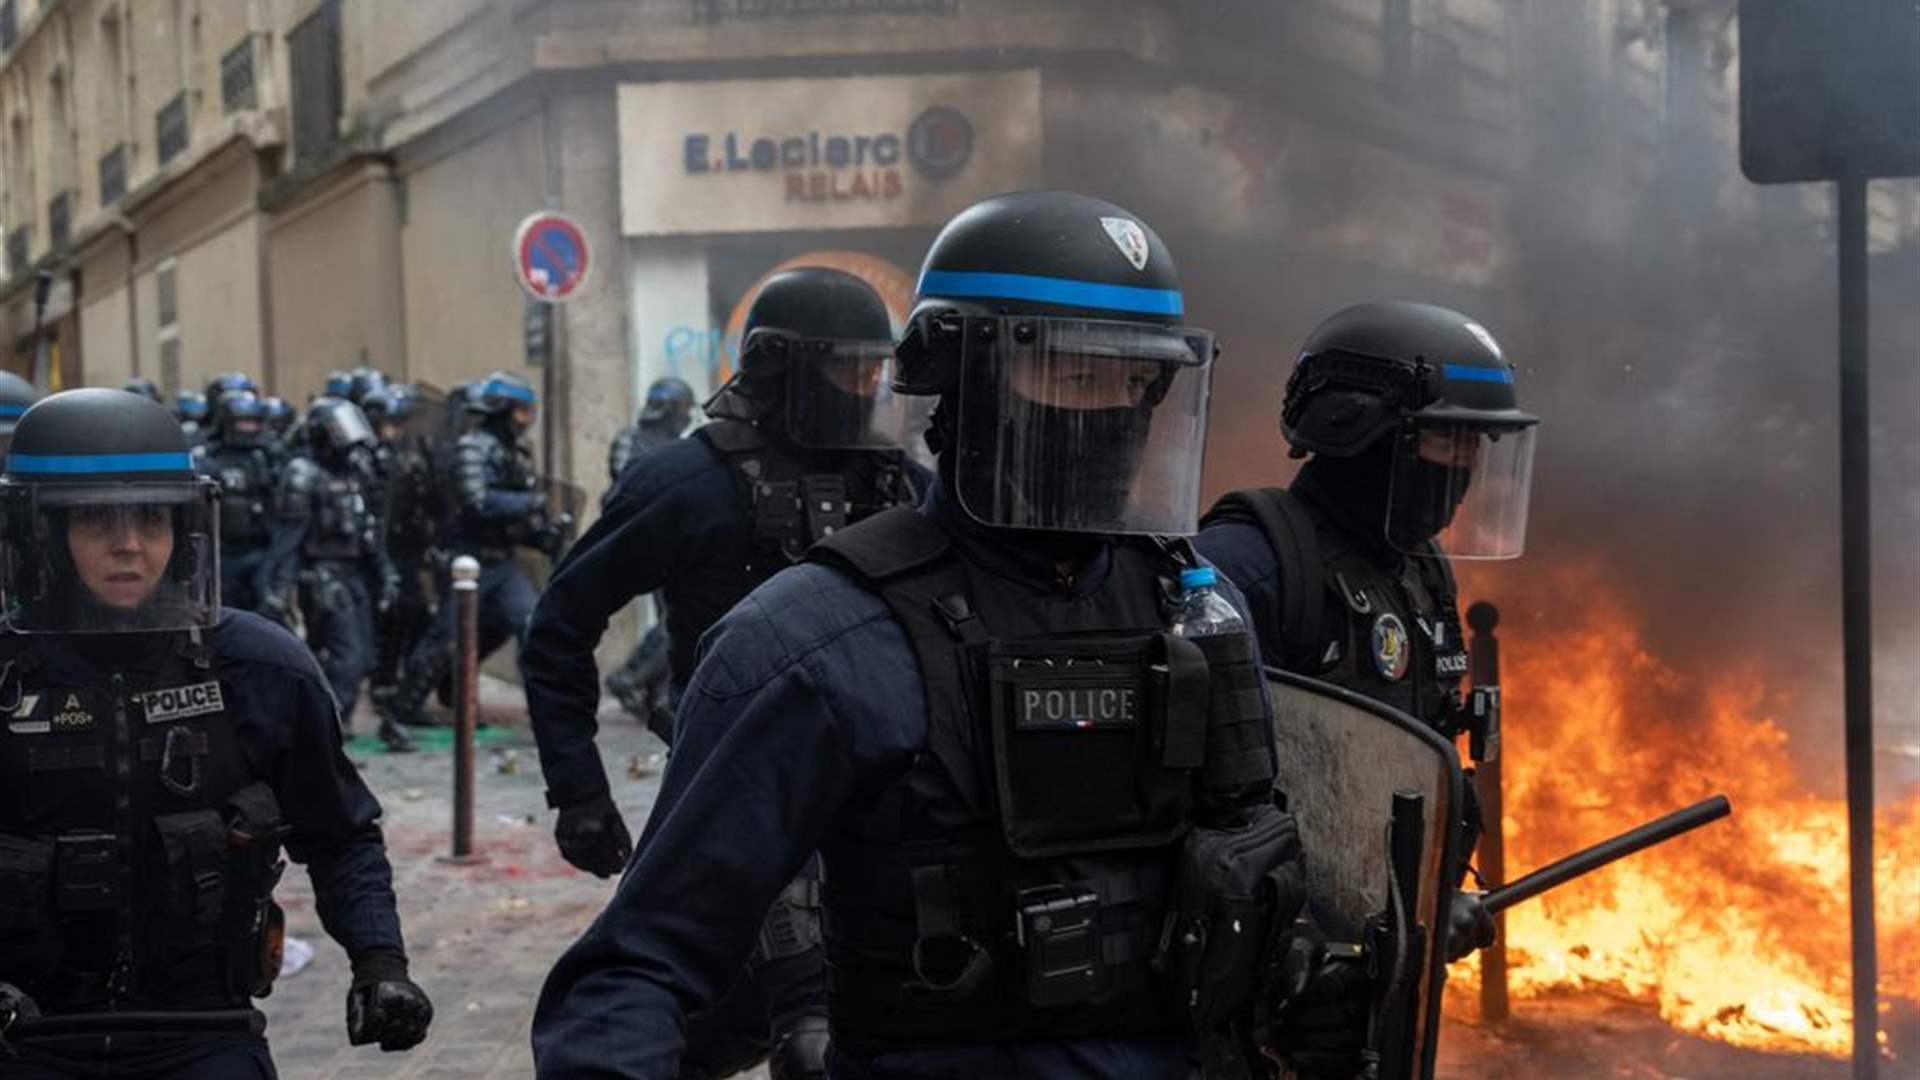 Fresh unrest in France as anger simmers over police shooting